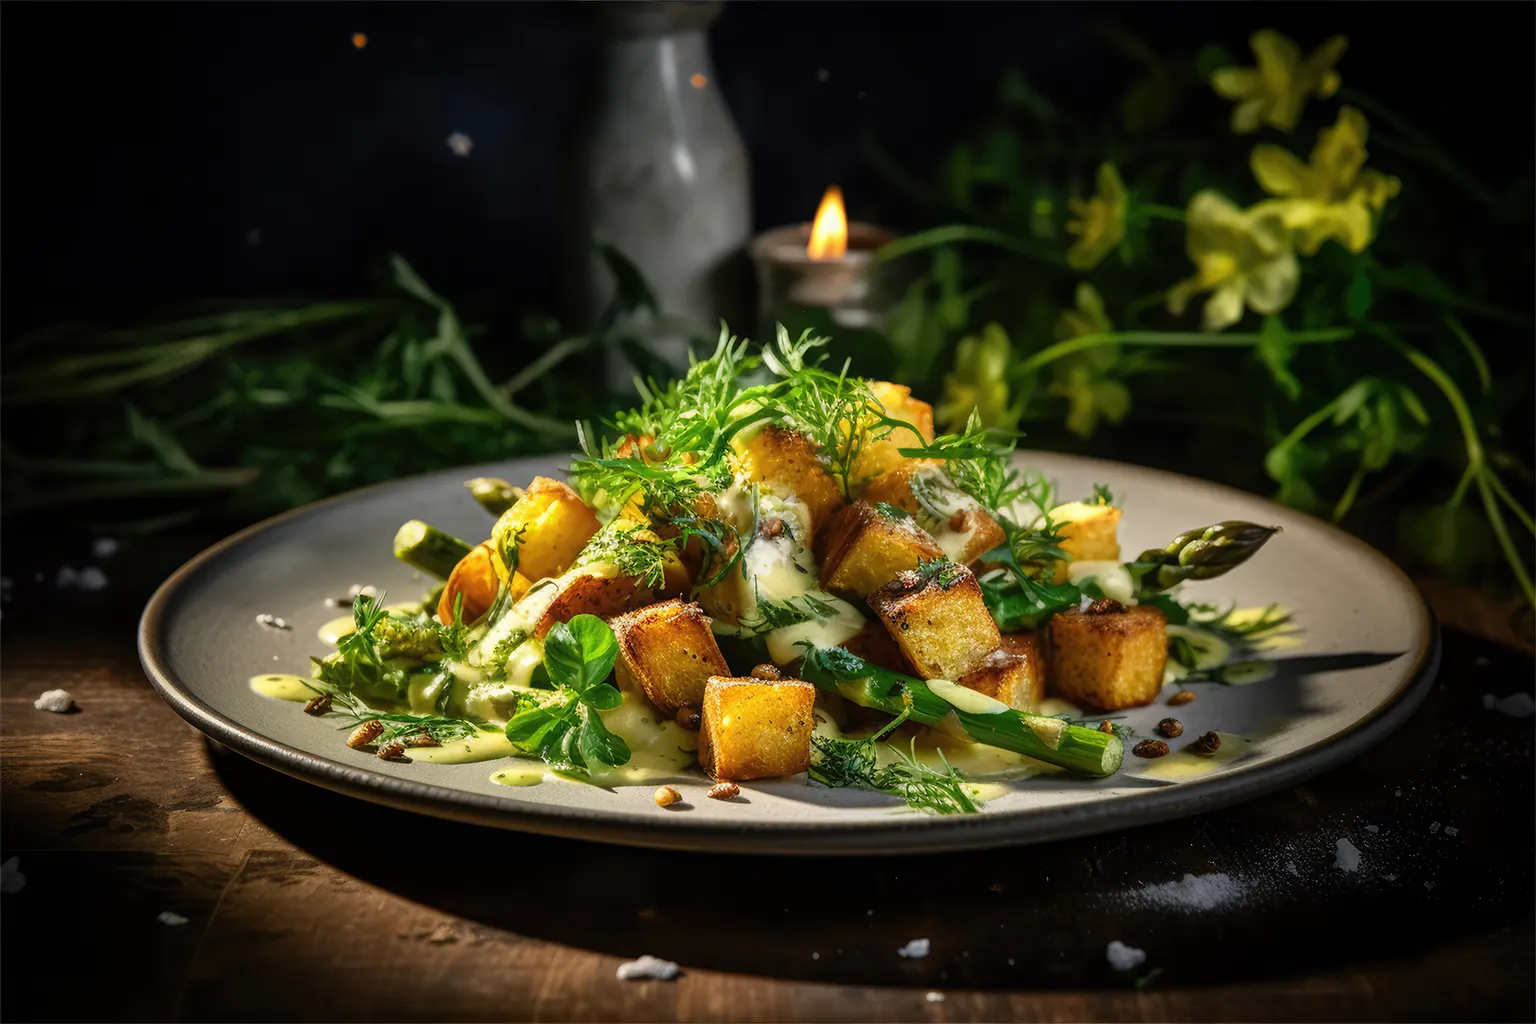 Asparagus and Wild Herb Salad with Almond Croutons